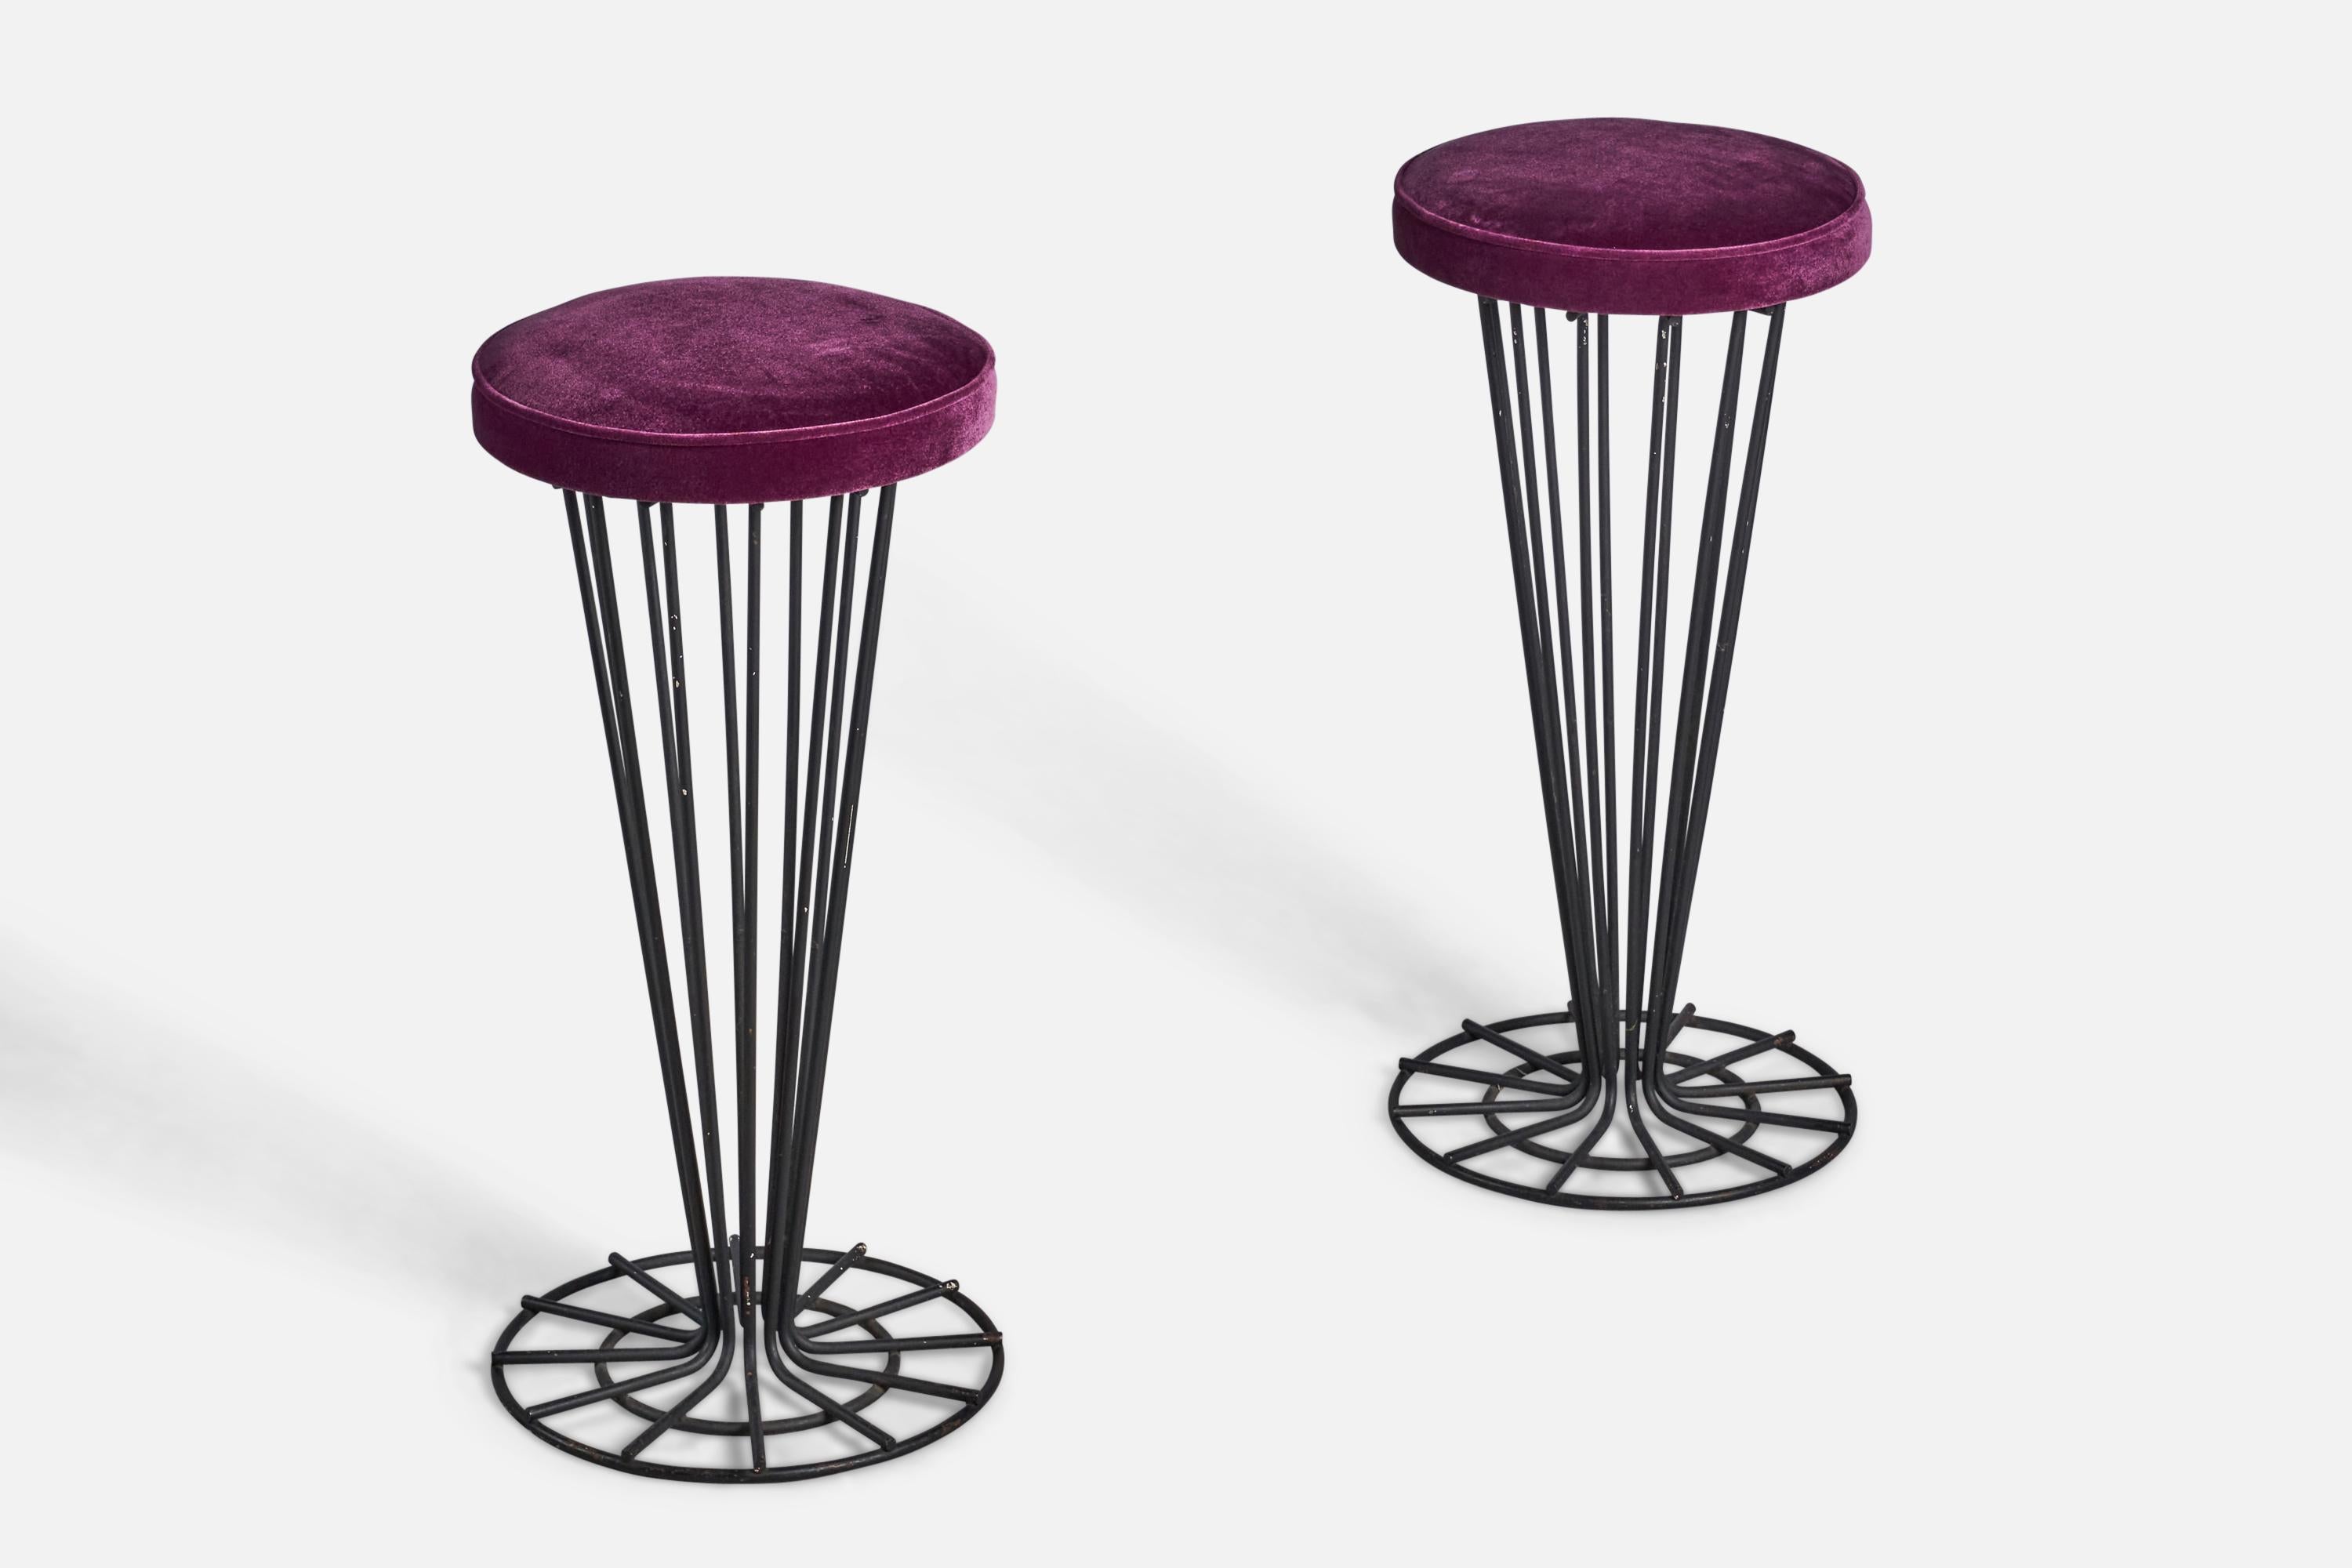 A pair of black-painted iron and purple velvet stools designed and produced in the US, c. 1940s.